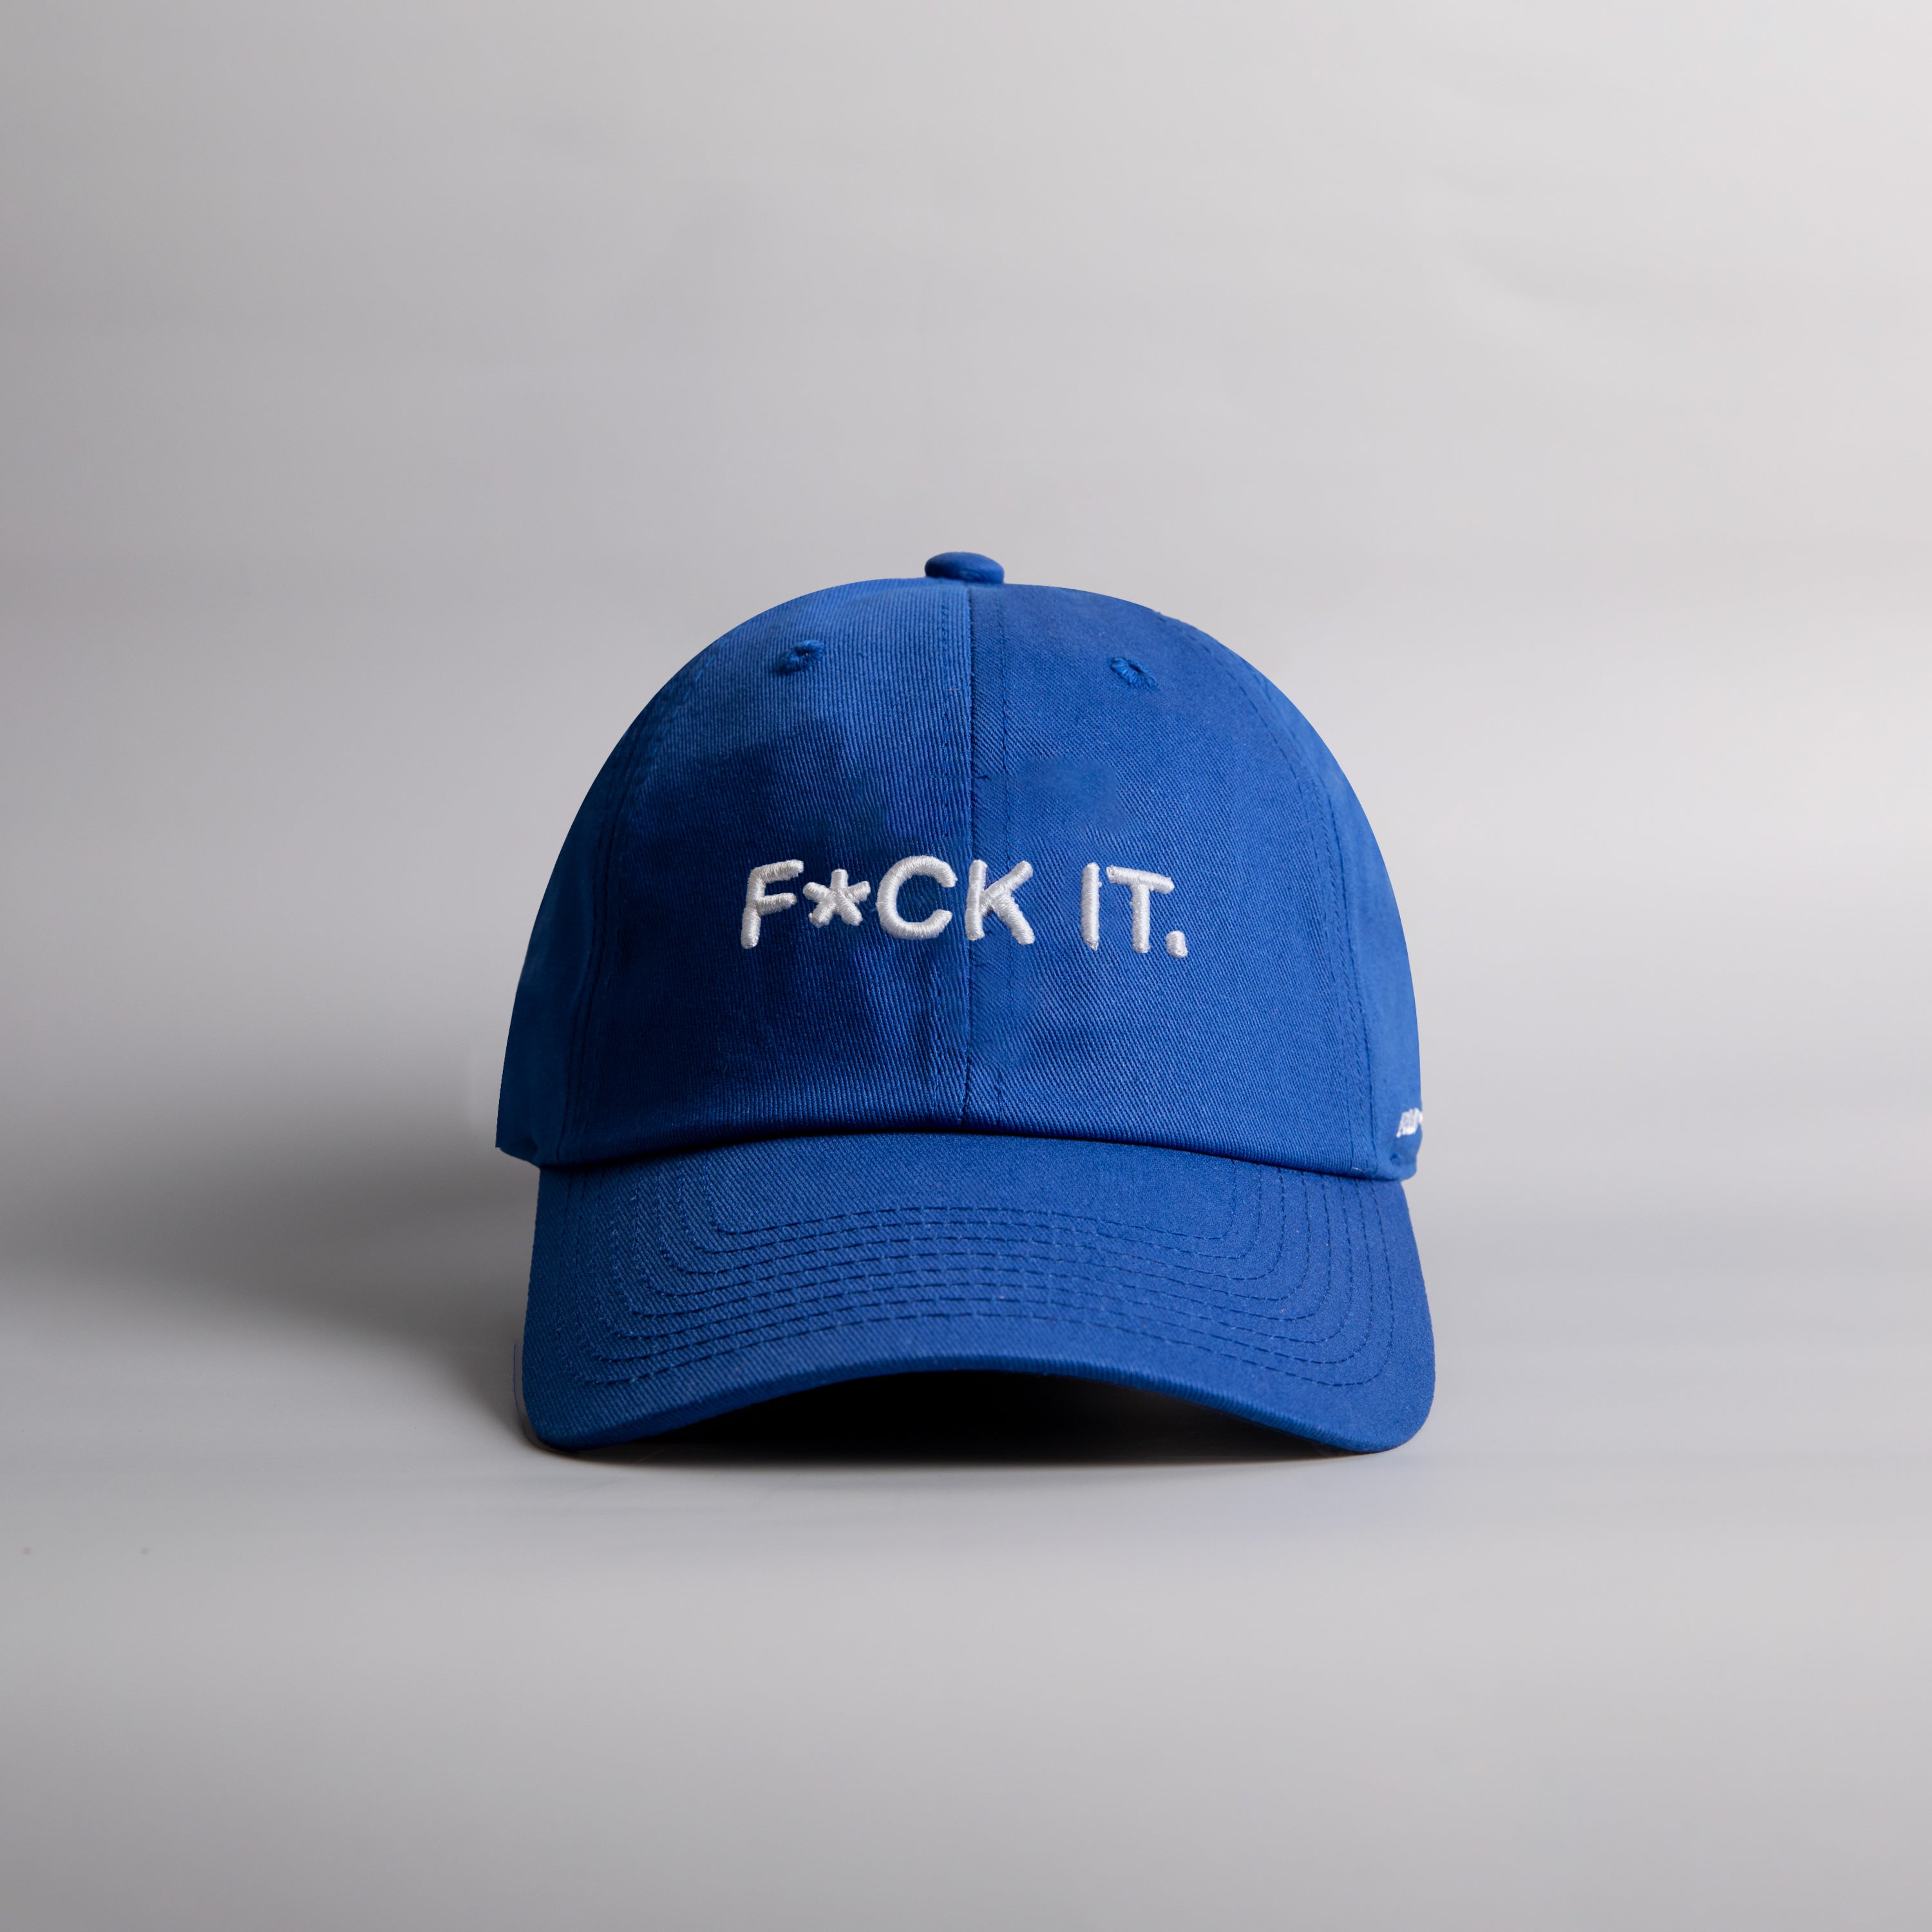 F*CK IT. ROYAL BLUE RELAXED FIT DISTRESSED HAT